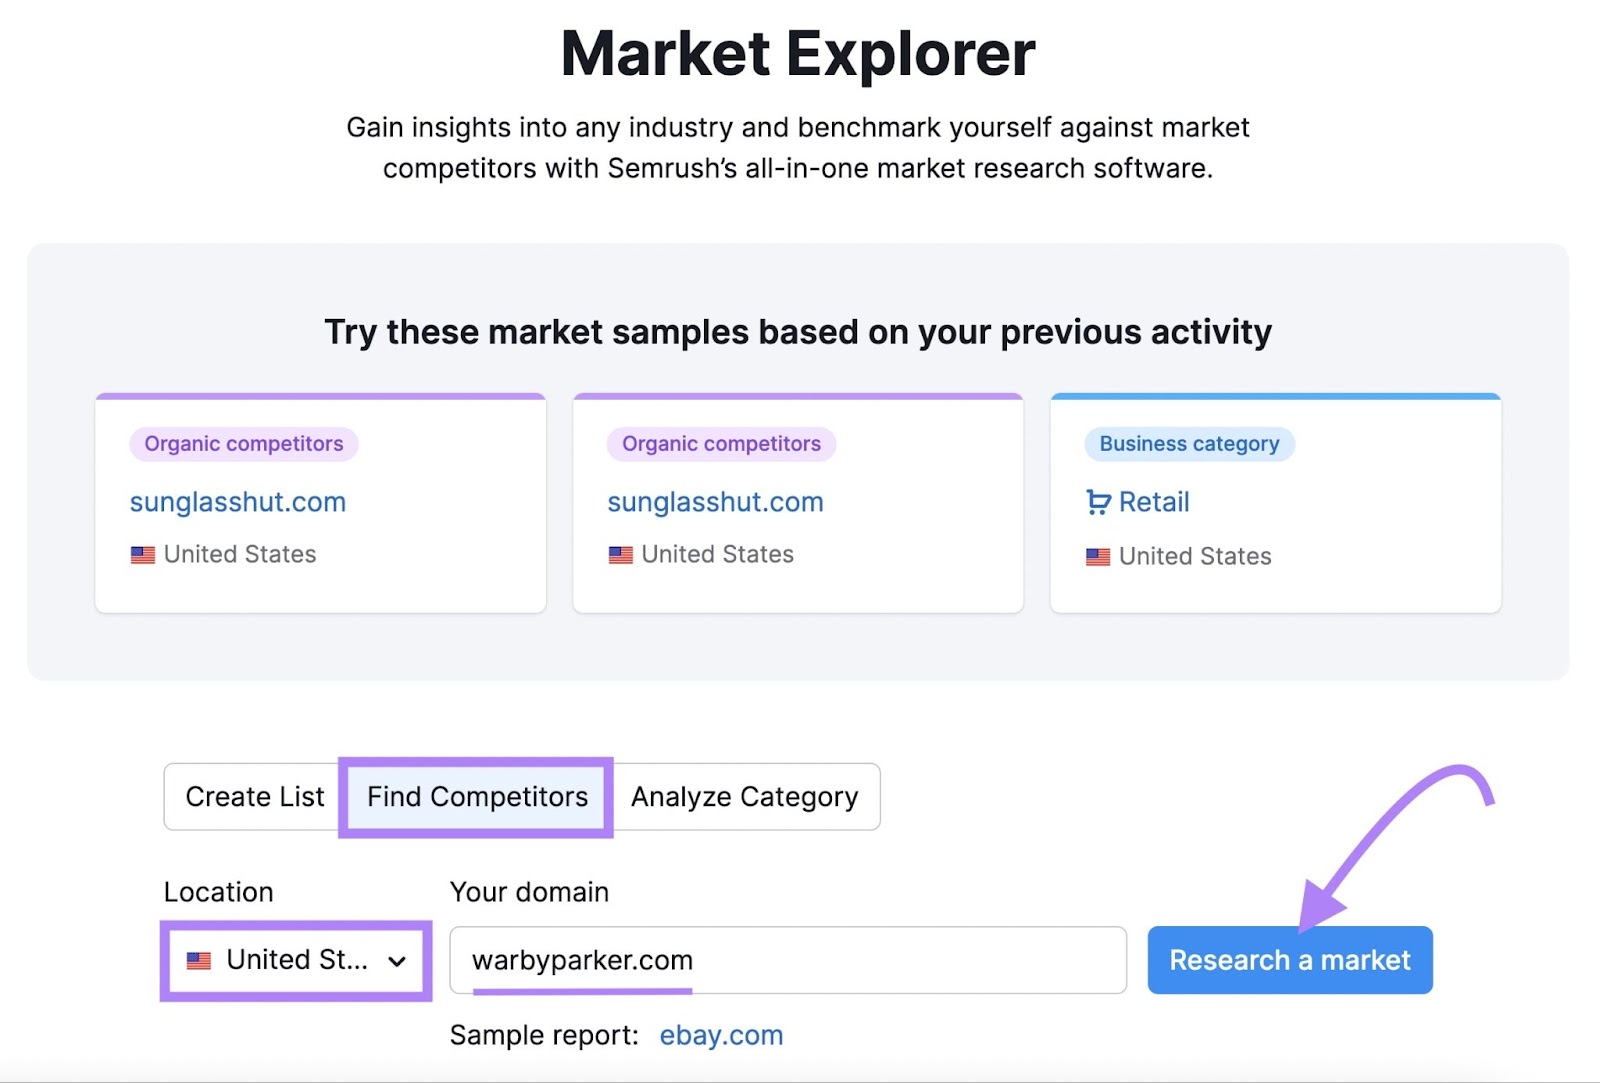 find competitors for "warbyparker.com" successful  the US utilizing Market Explorer tool